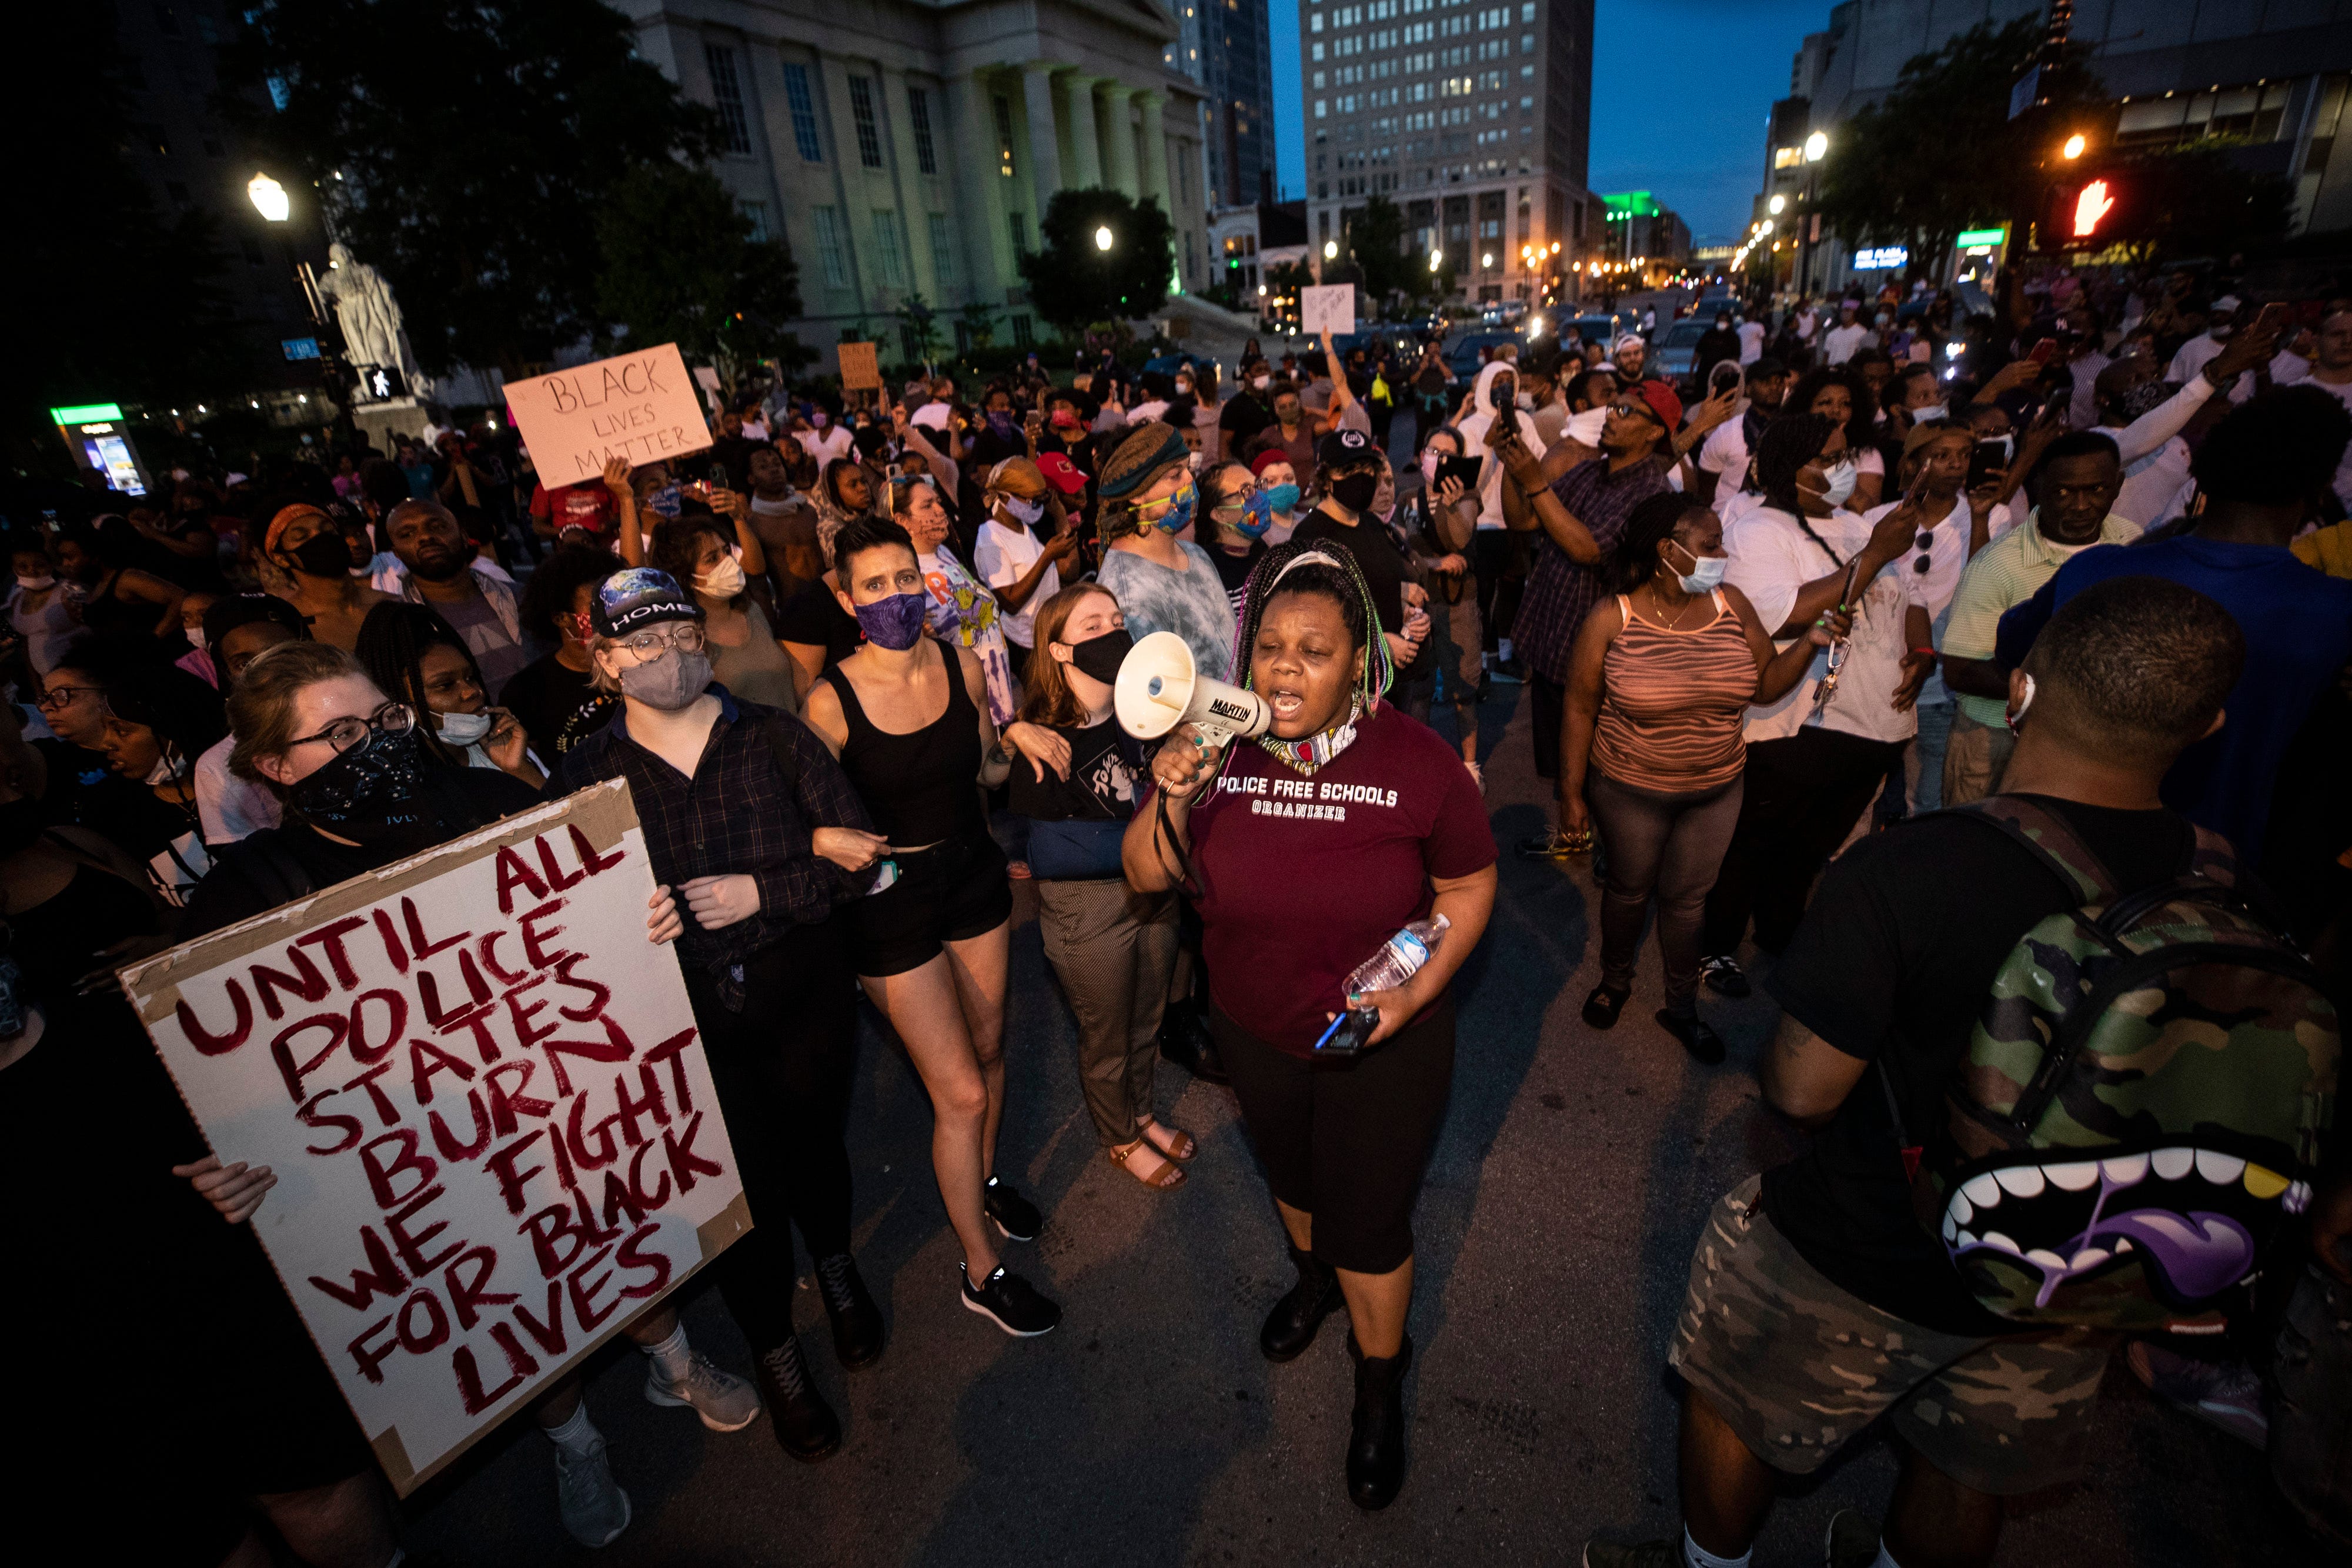 Despite a National Outcry, Activists in Louisville Fight the